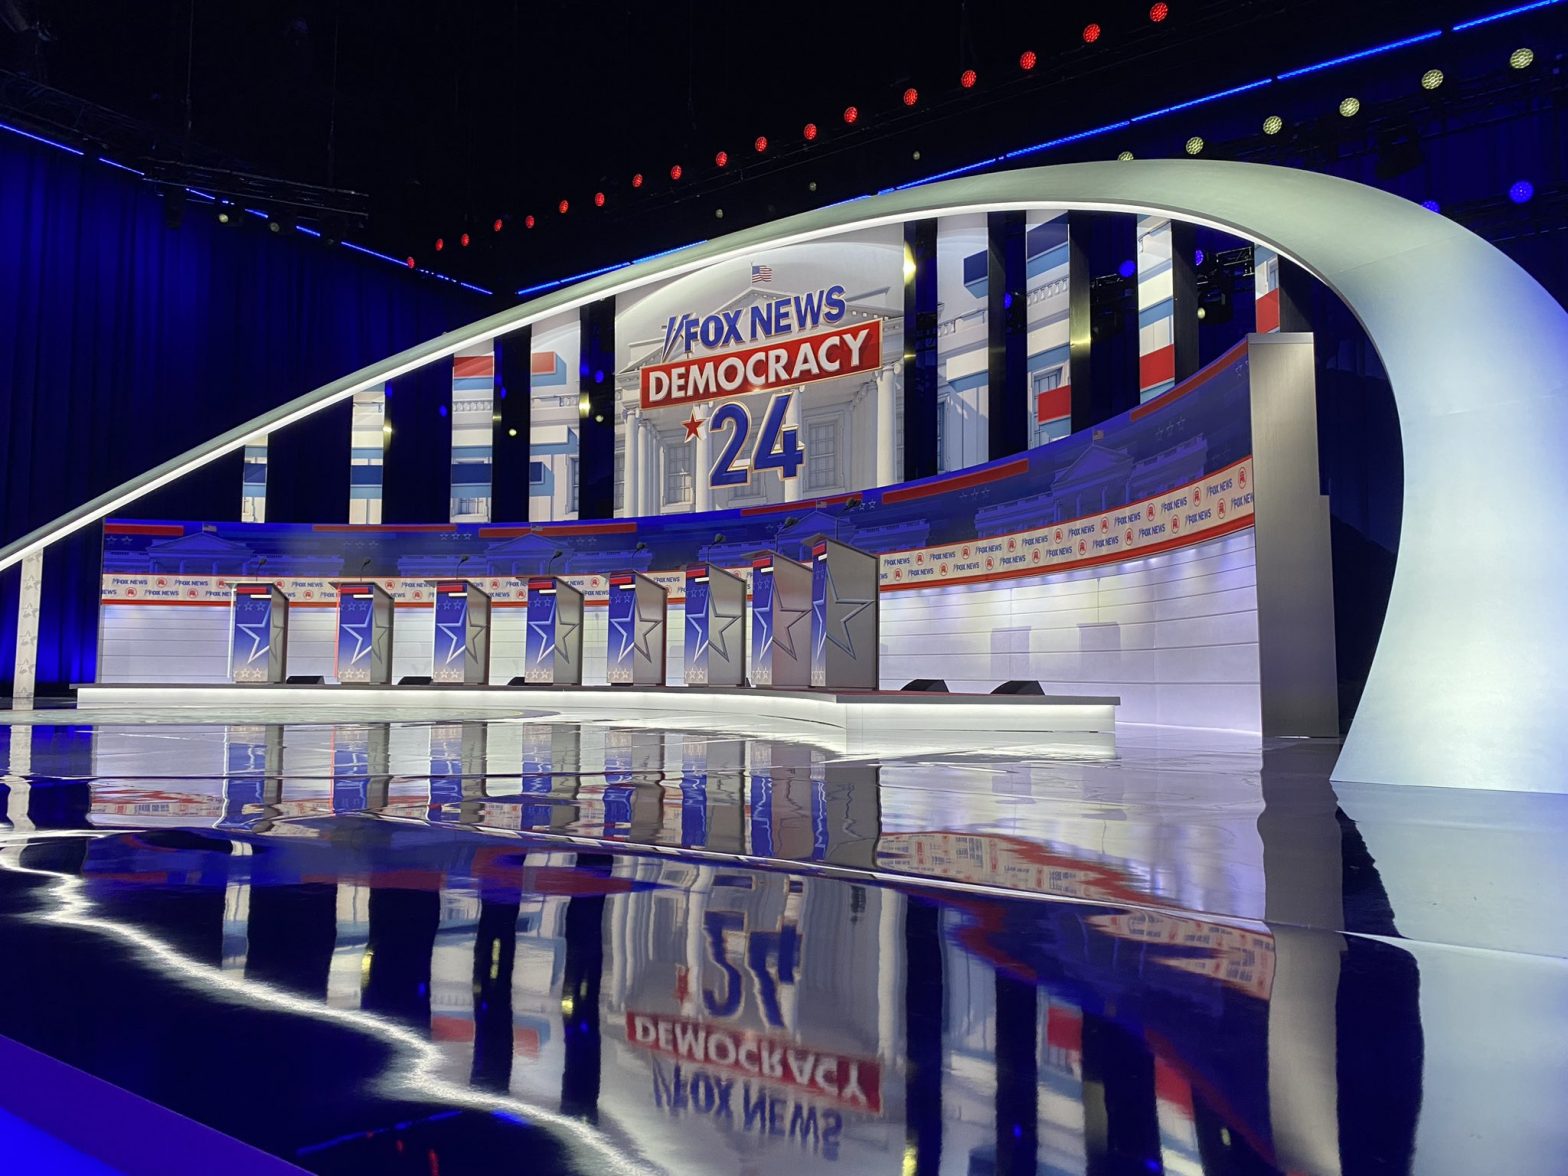 From ‘Israel’ to ‘Migration’: Key takeaways from the fourth GOP presidential debate 